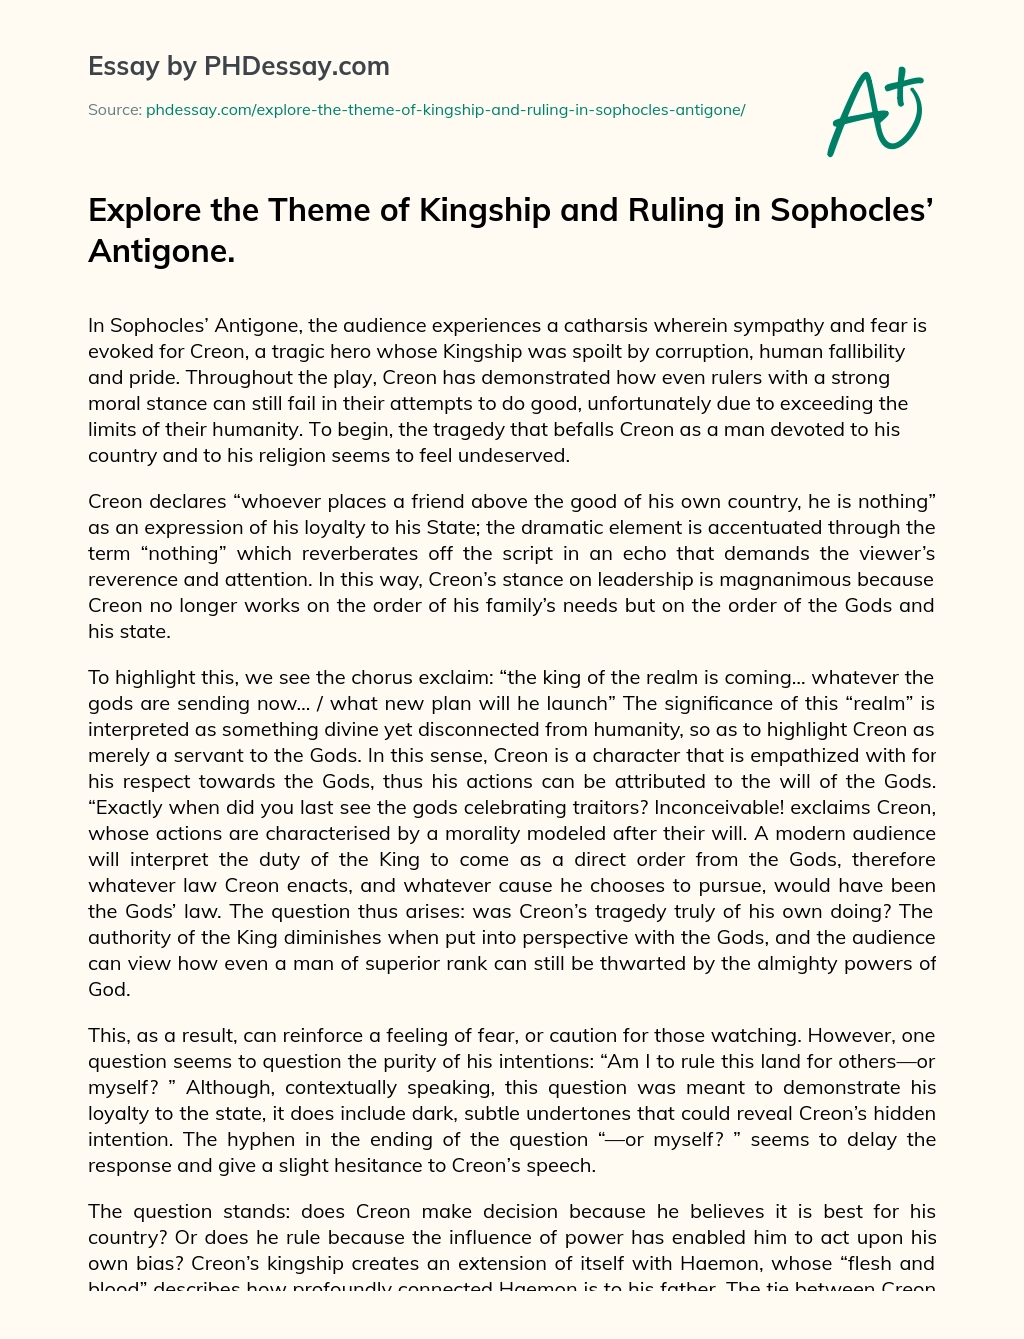 Explore the Theme of Kingship and Ruling in Sophocles’ Antigone. essay